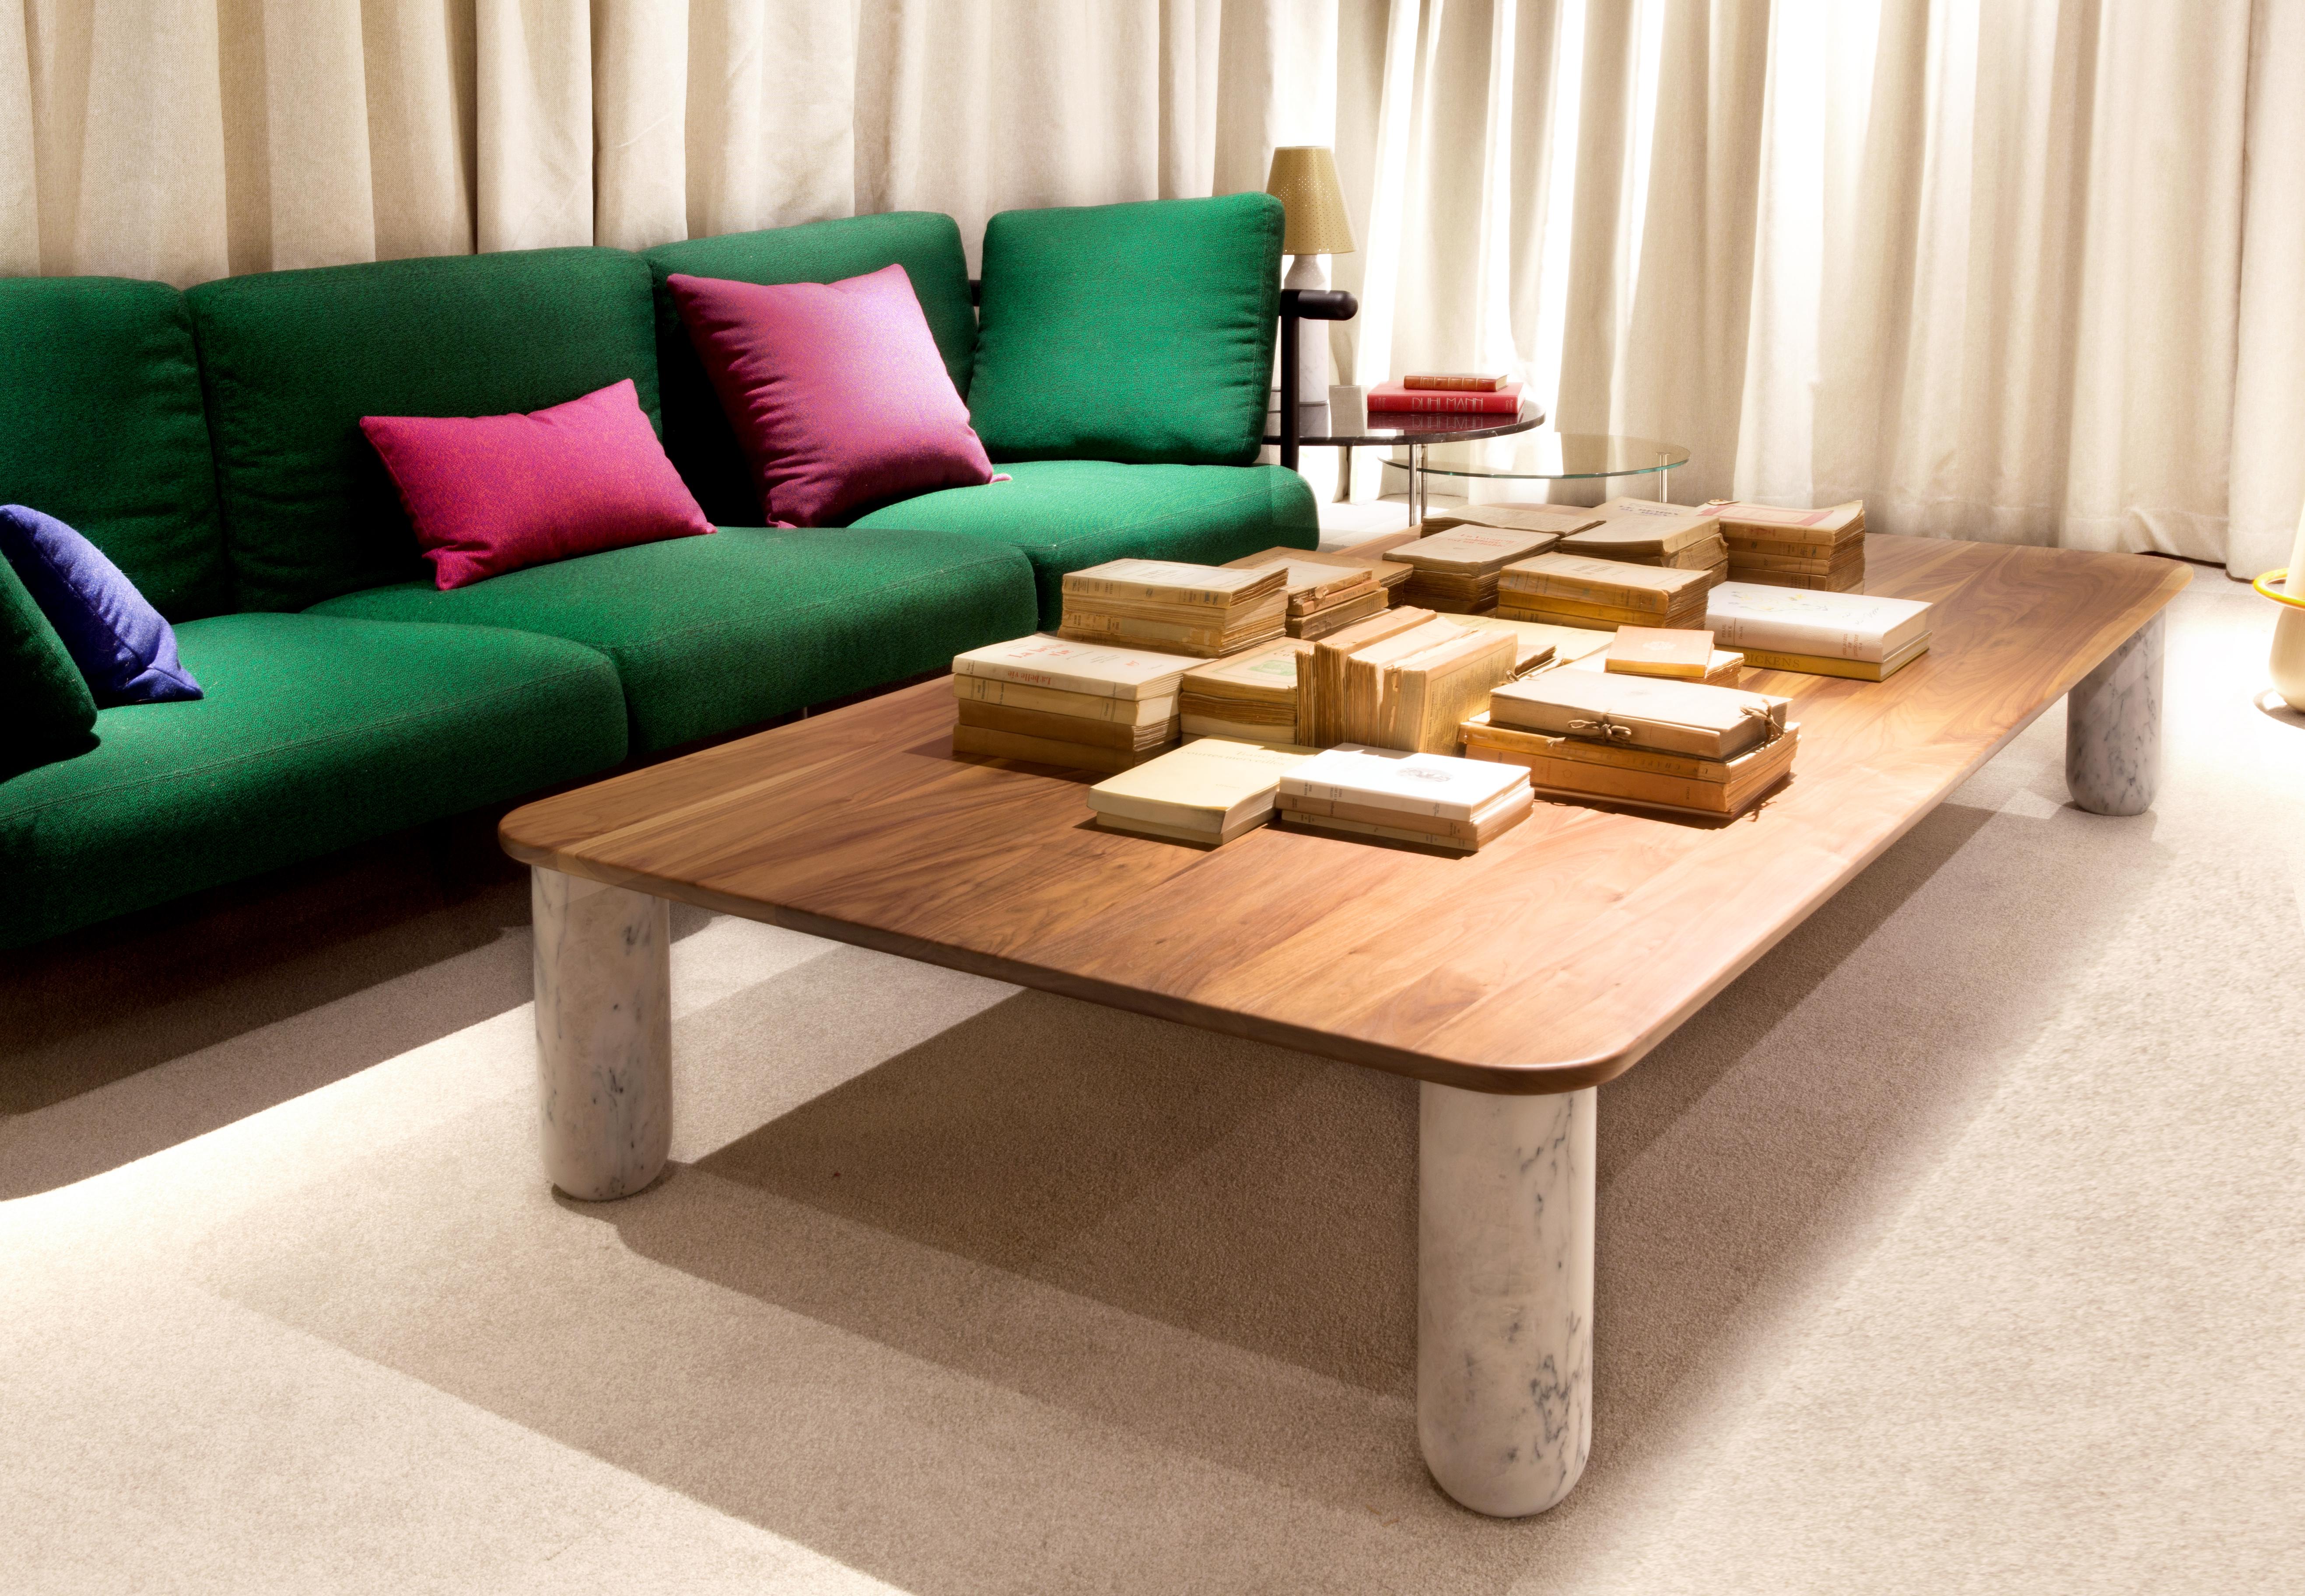 Sunday is a family of coffee tables and low consoles with a simple and clean design vocabulary. The combination of heavy marble legs with the thin solid wood or marble top creates an interesting contrast while the rounded edges and generous